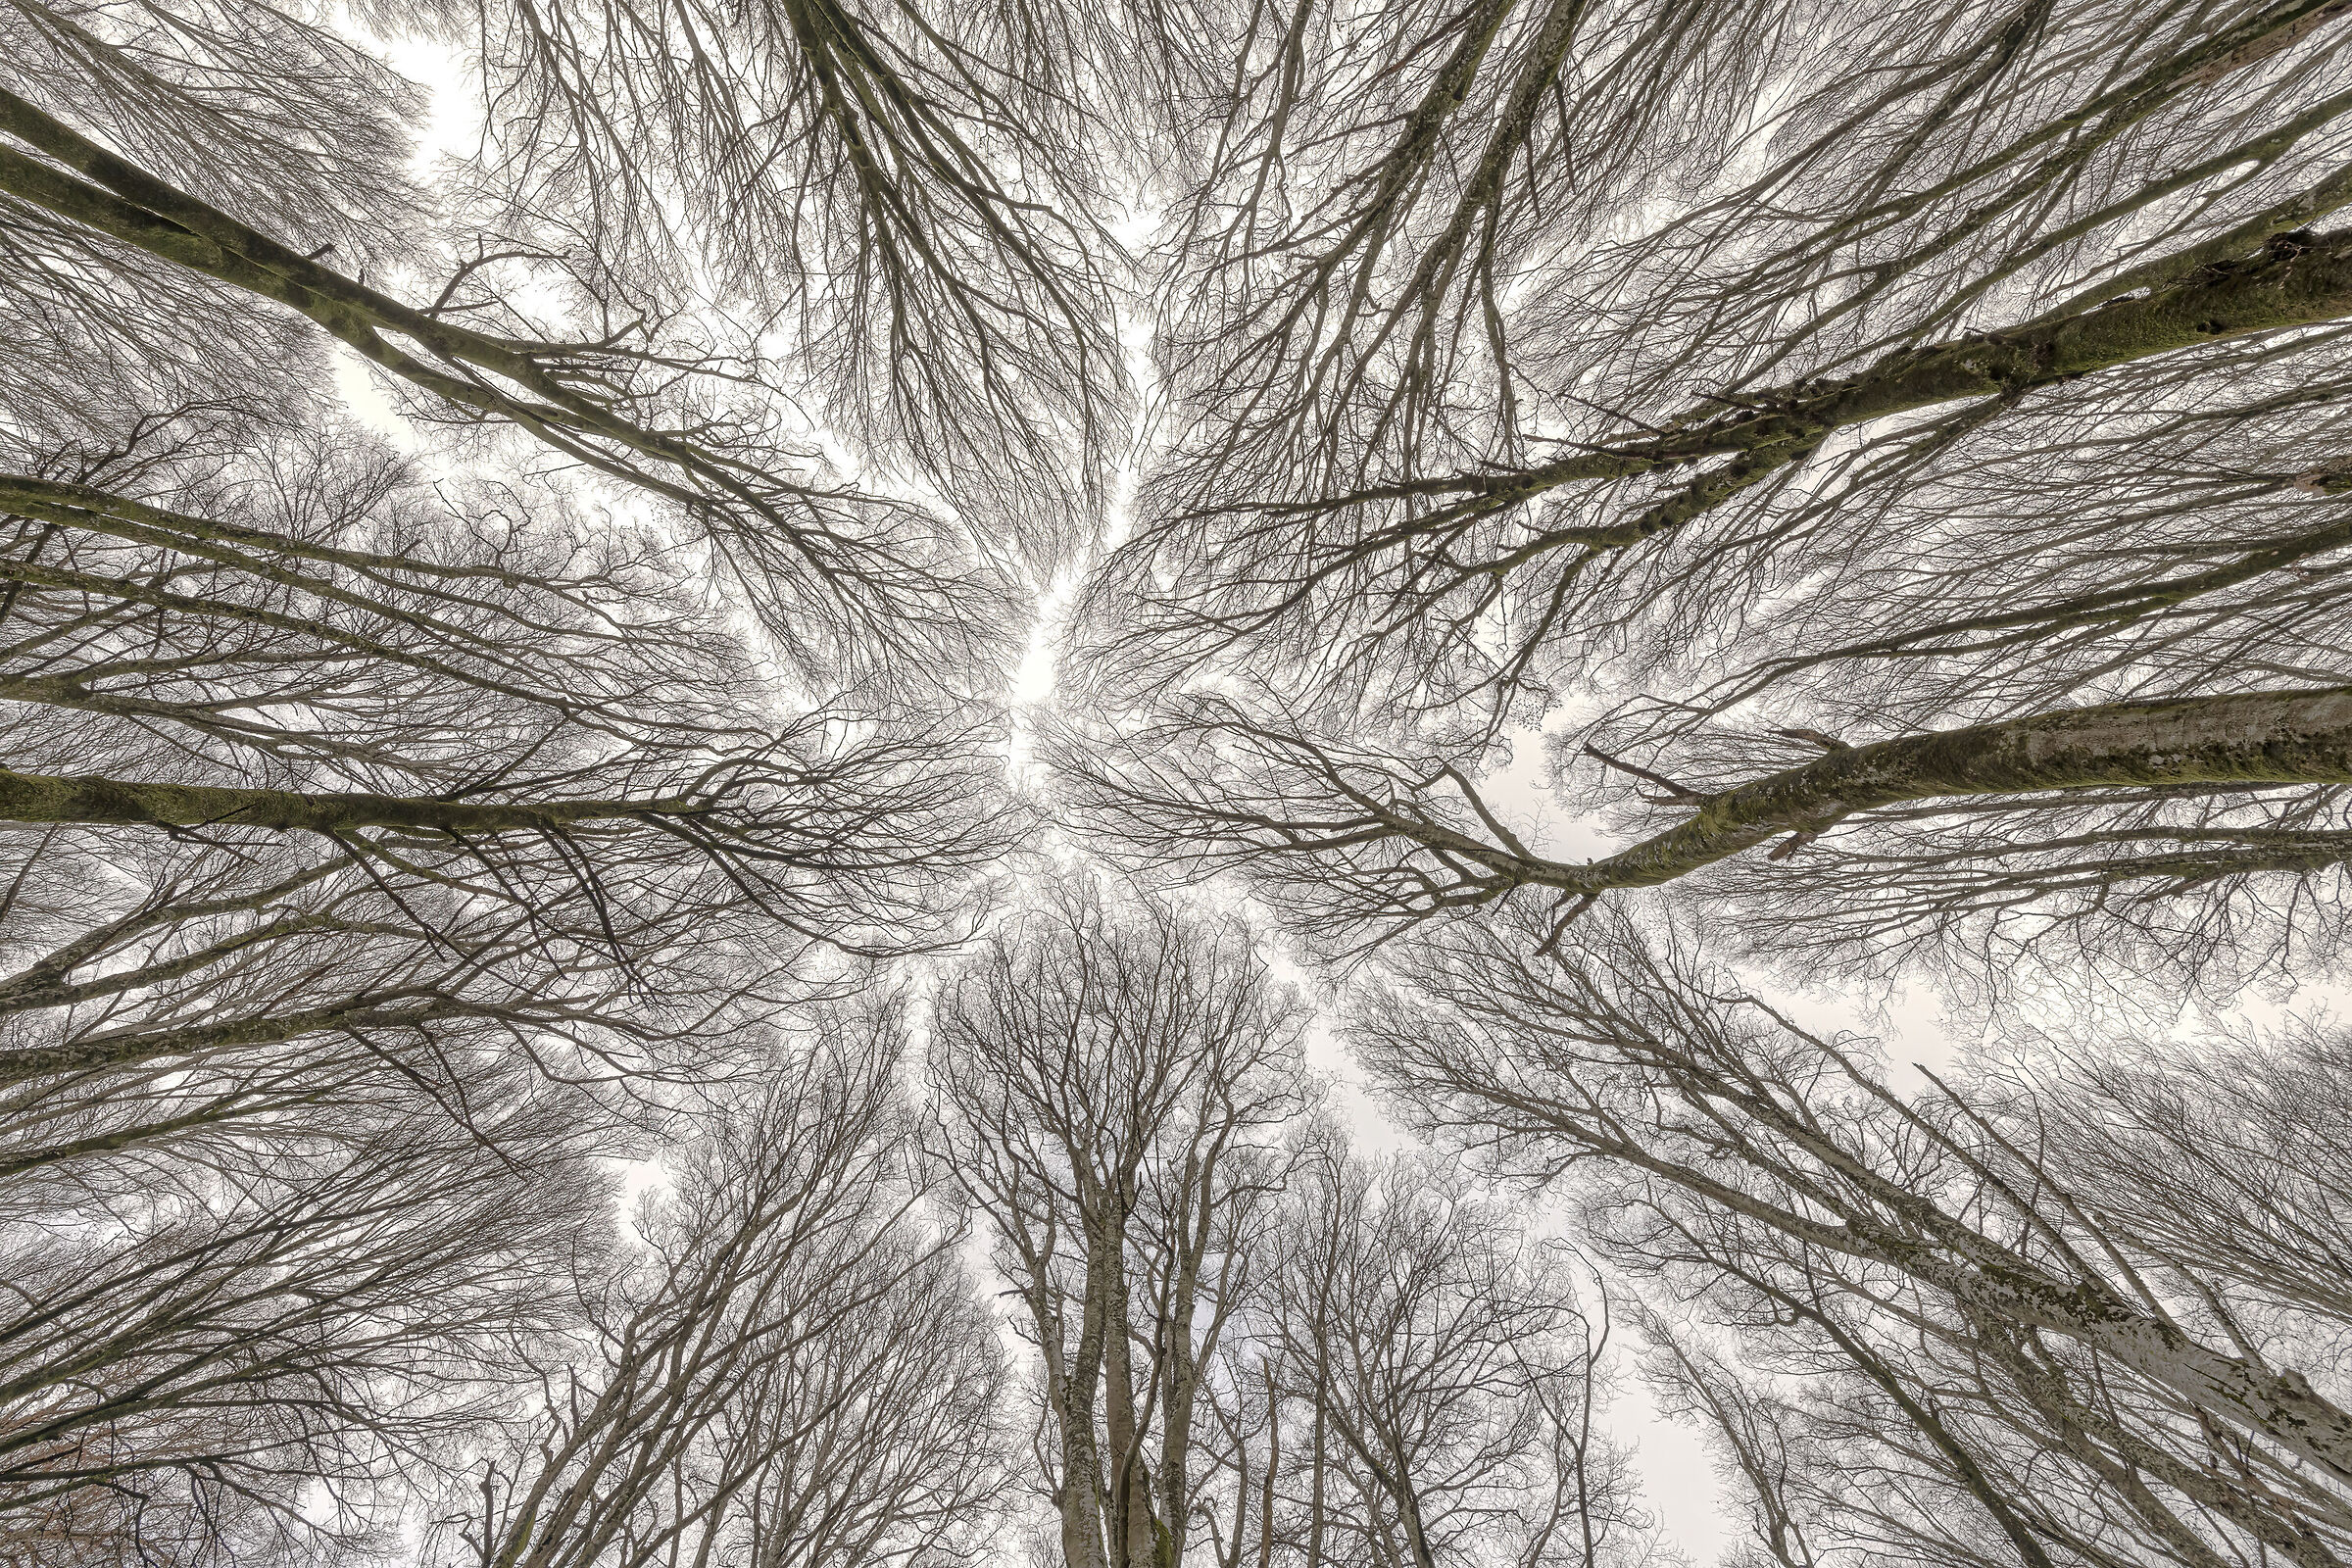 A roof of beech branches in winter...